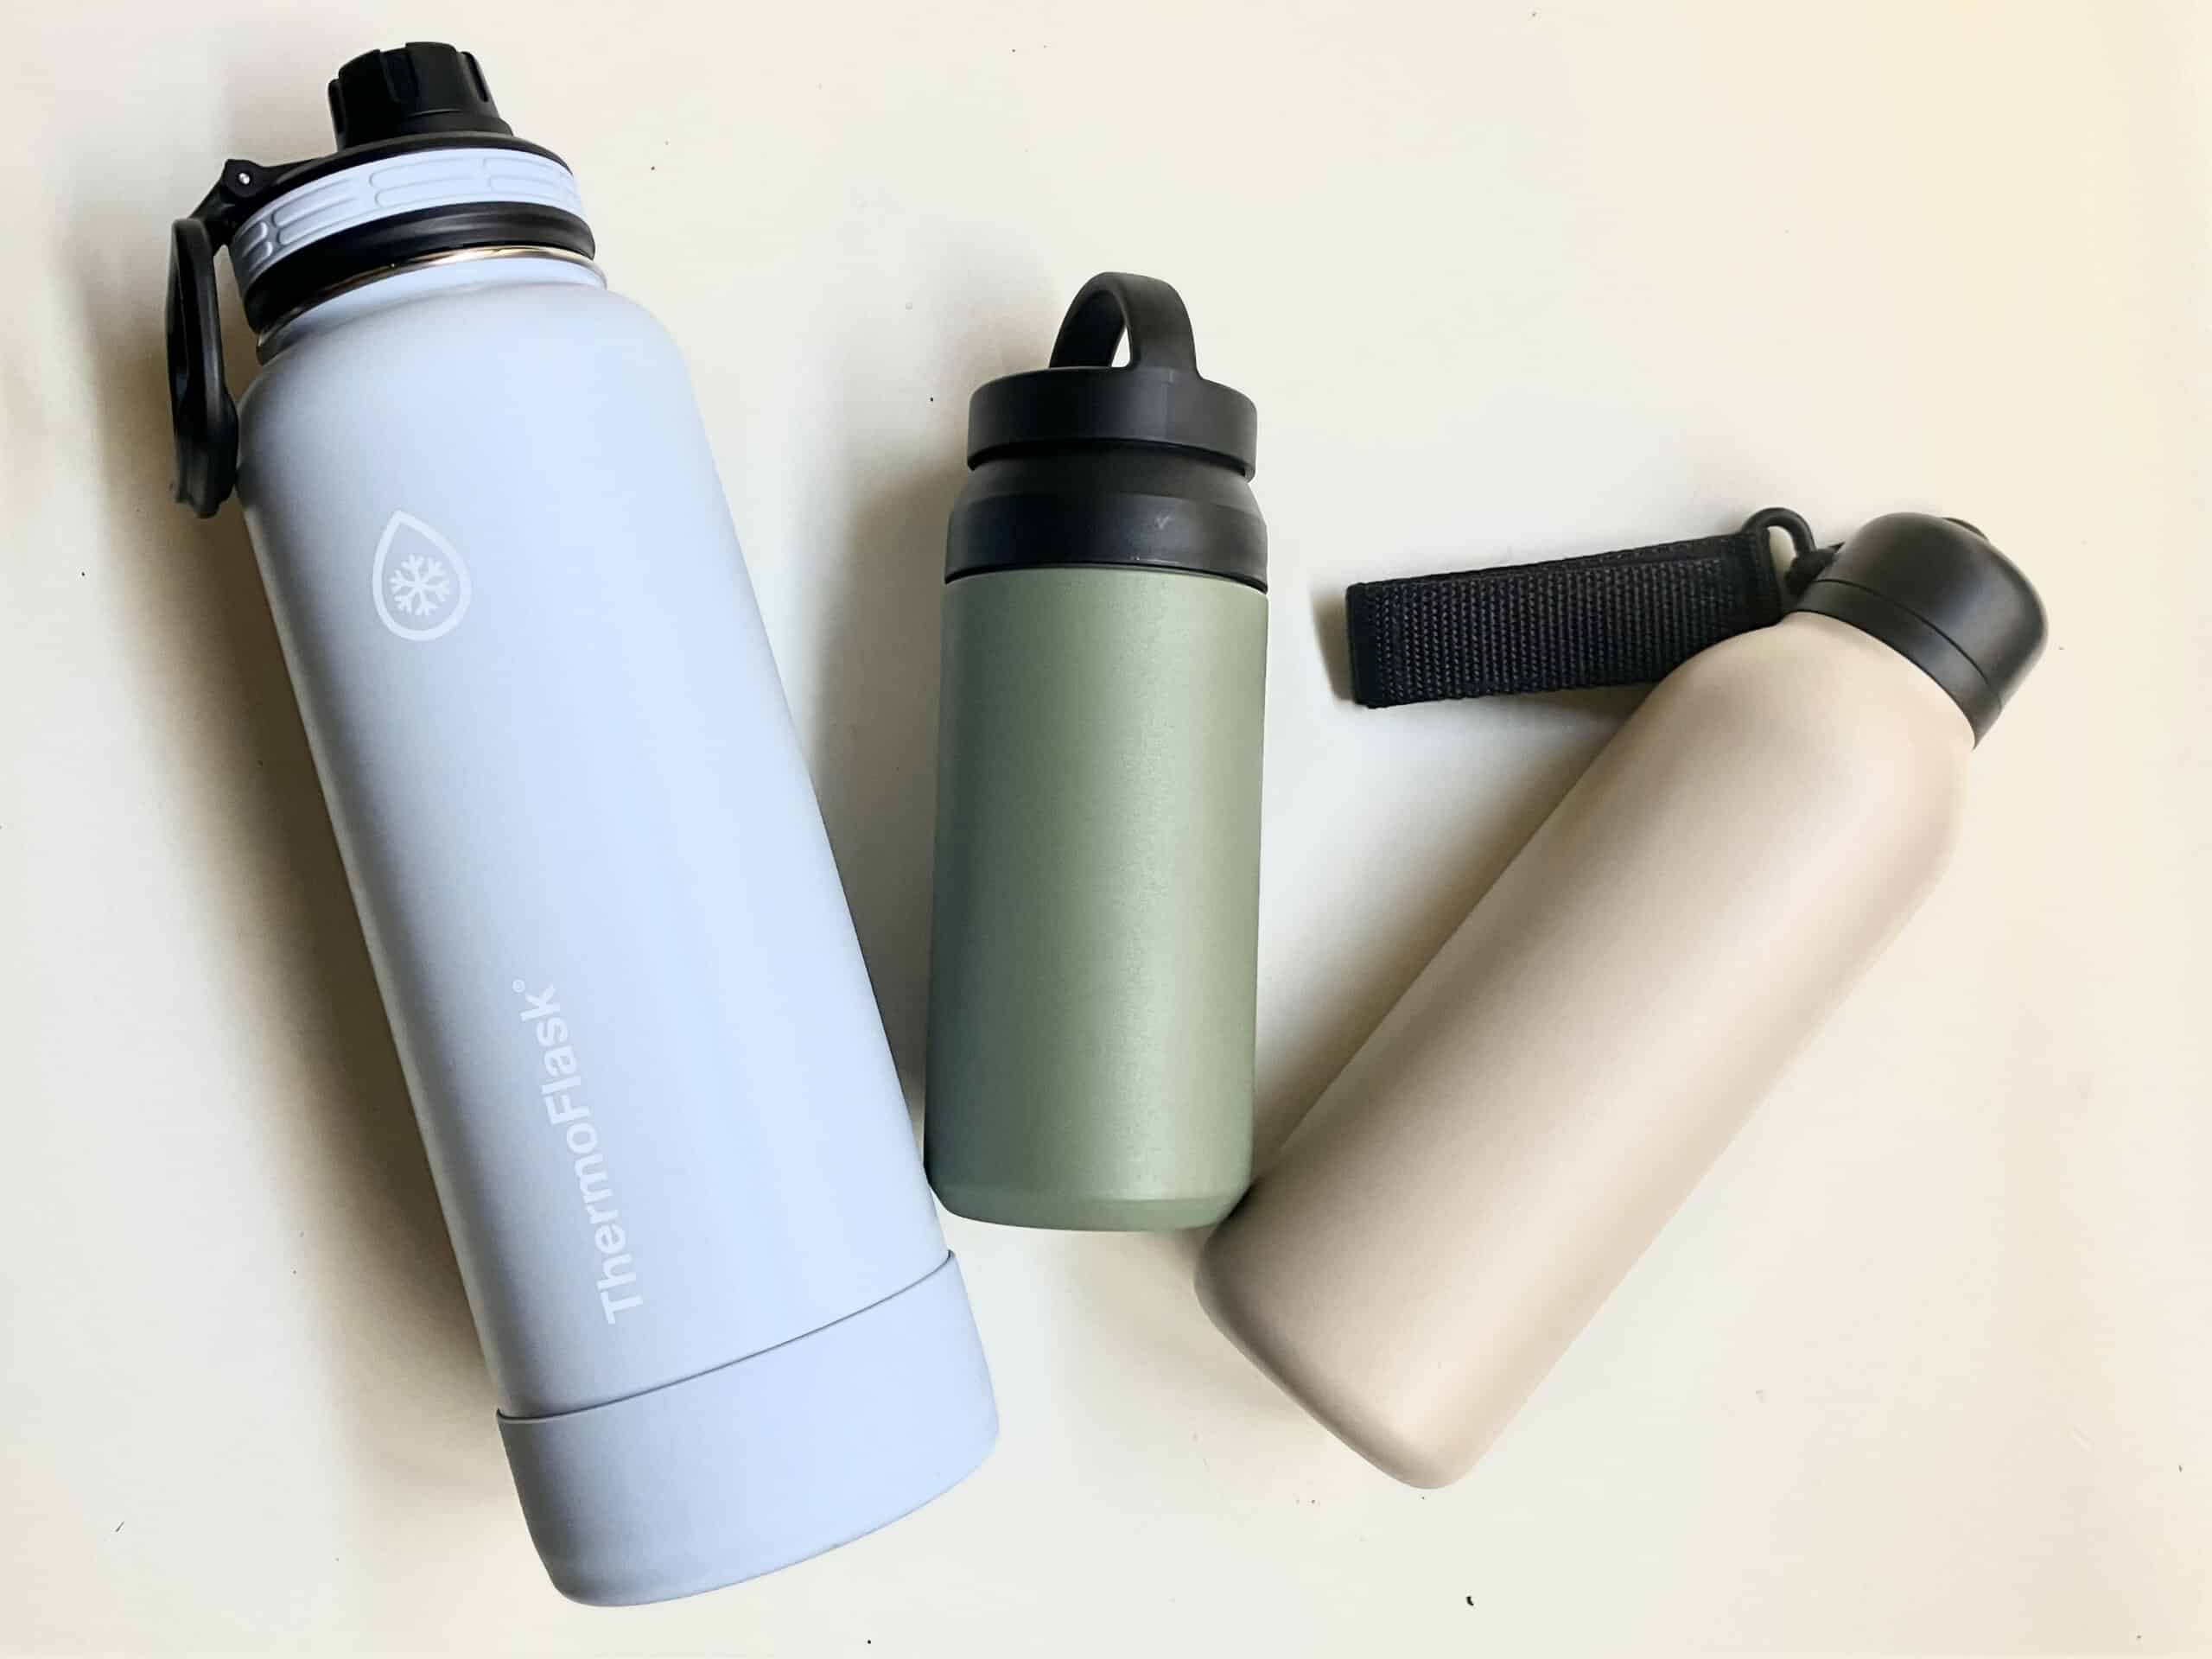 Reusable water bottles used for tours and private purposes.